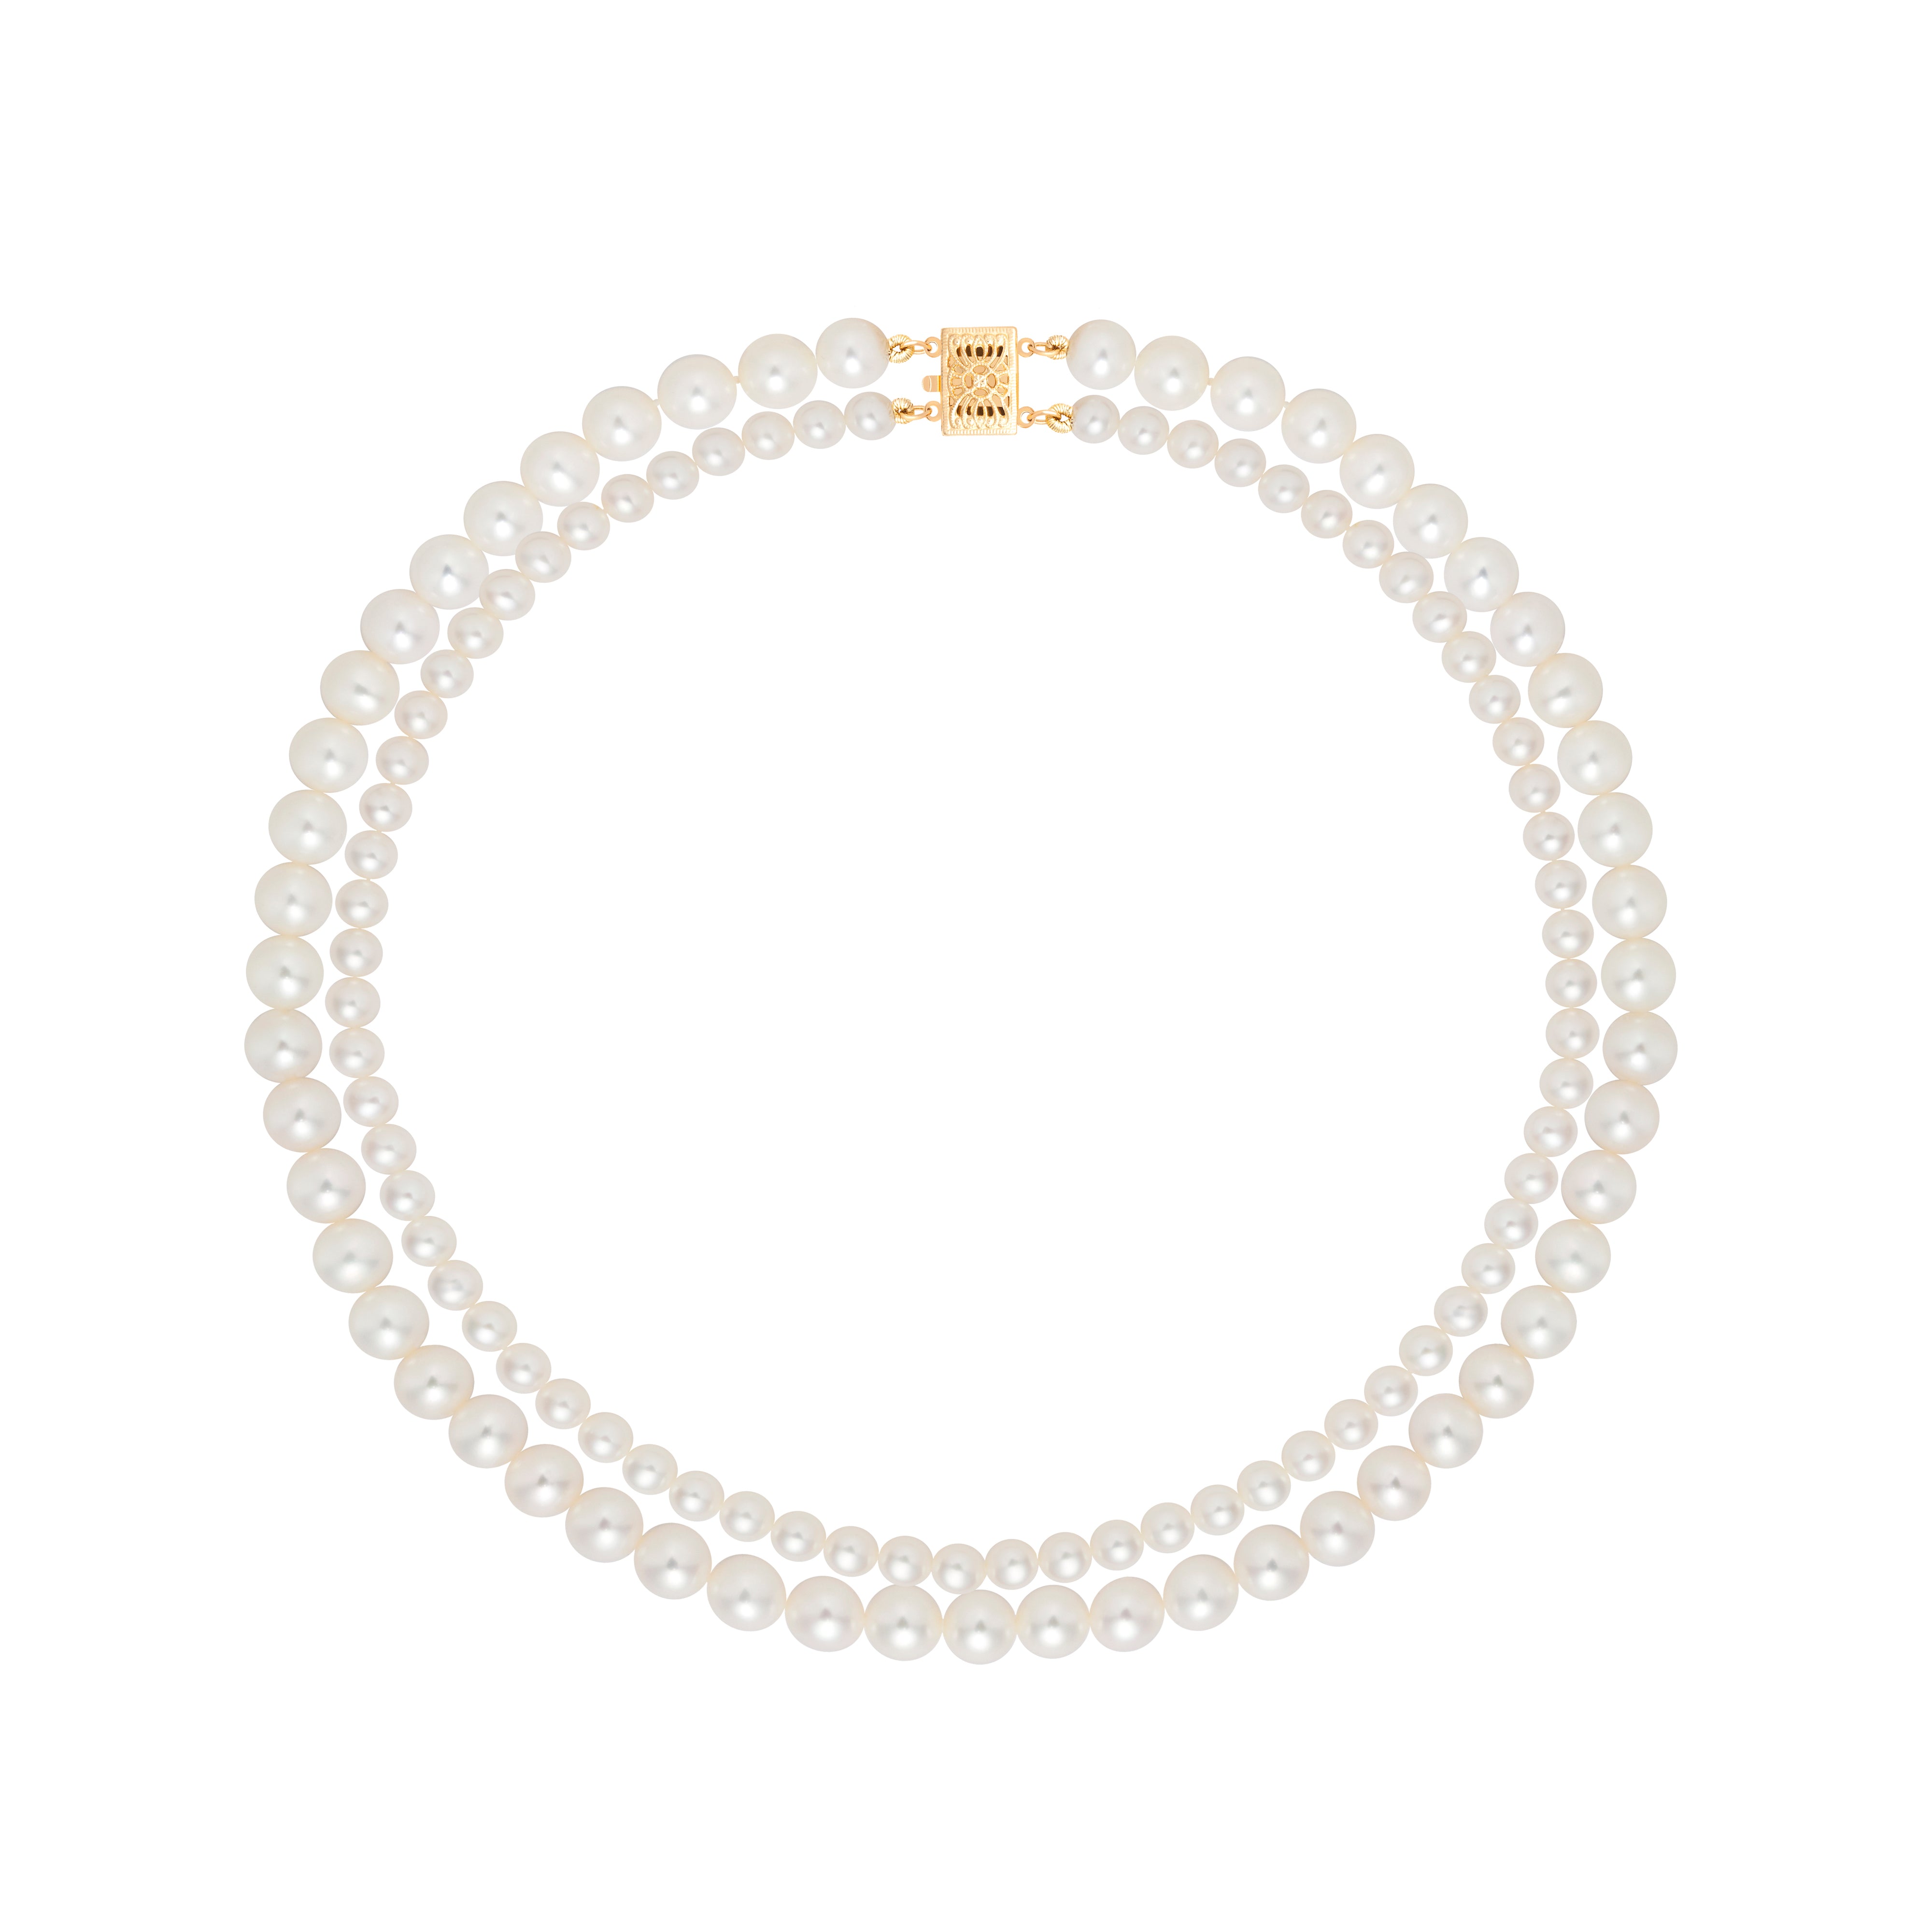 Freshwater pearl double strand necklace with solid gold clasp